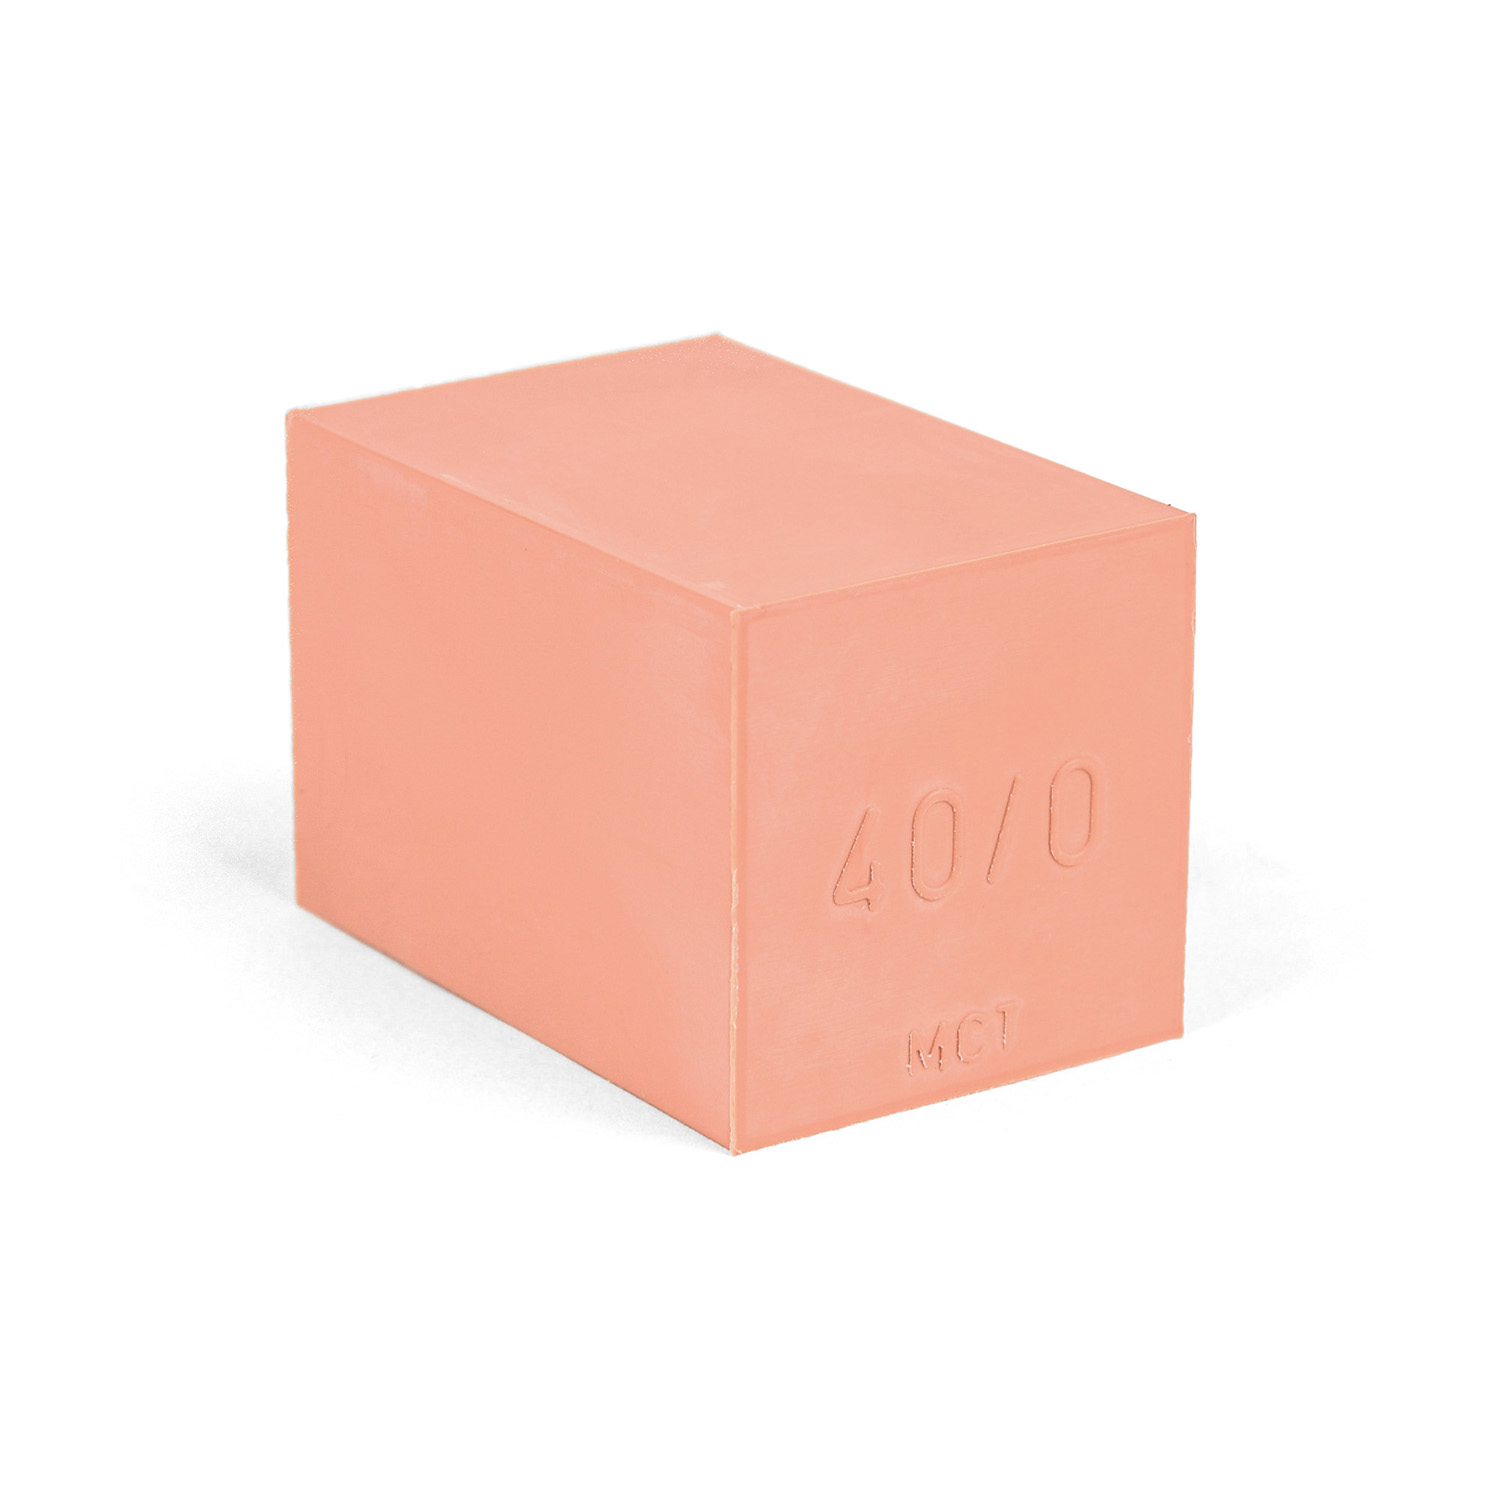 40-0 Spare block lycron, 40-0 solid block size 40x40mm